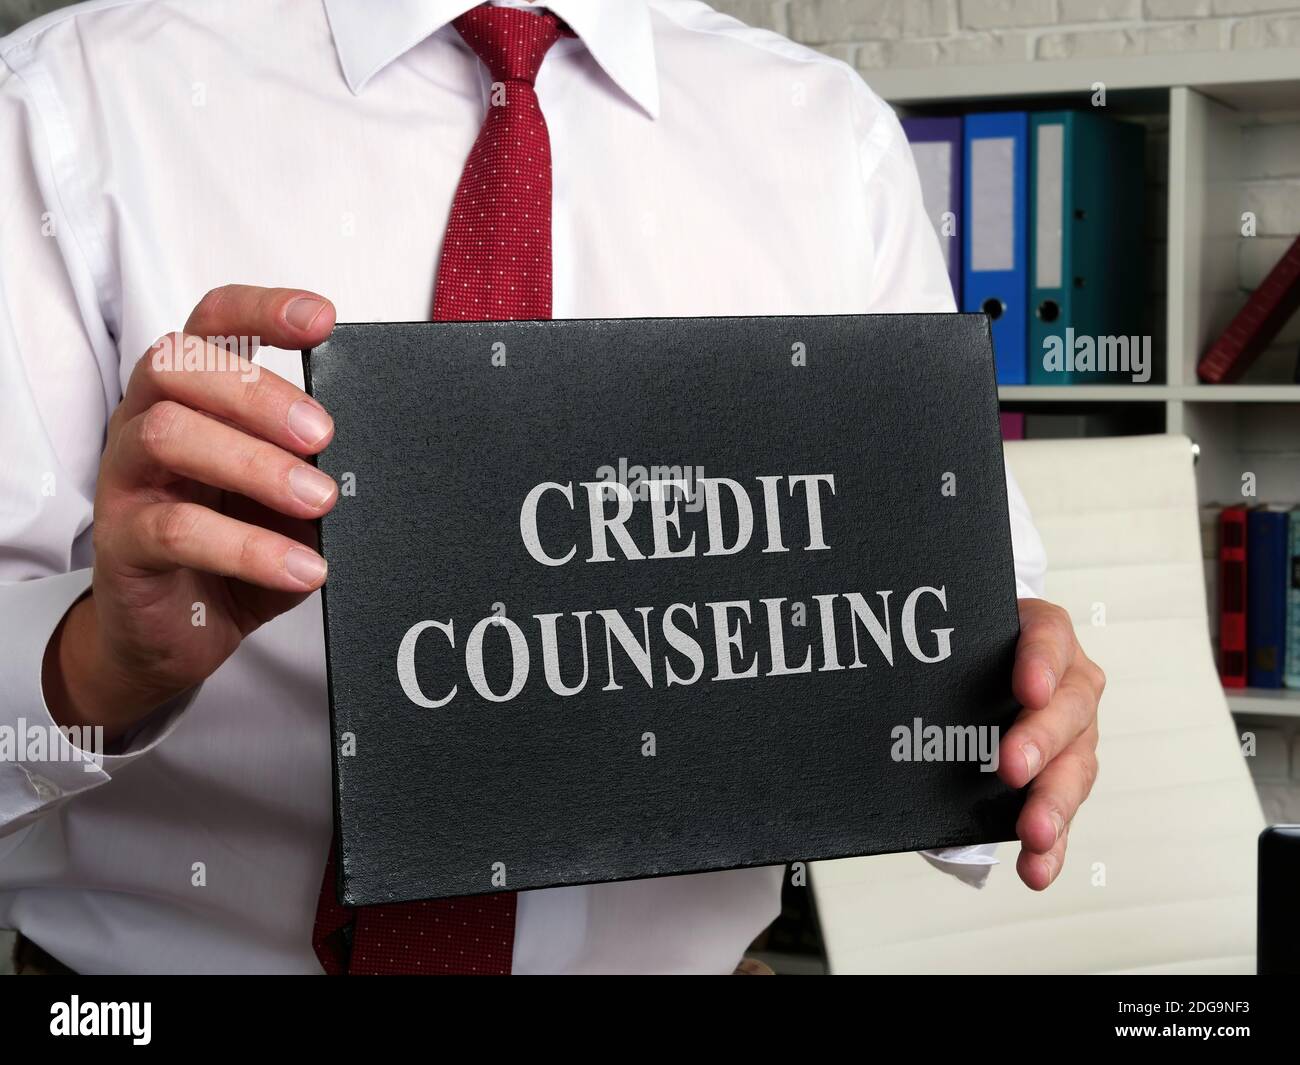 Credit counseling words on the black plate. Stock Photo